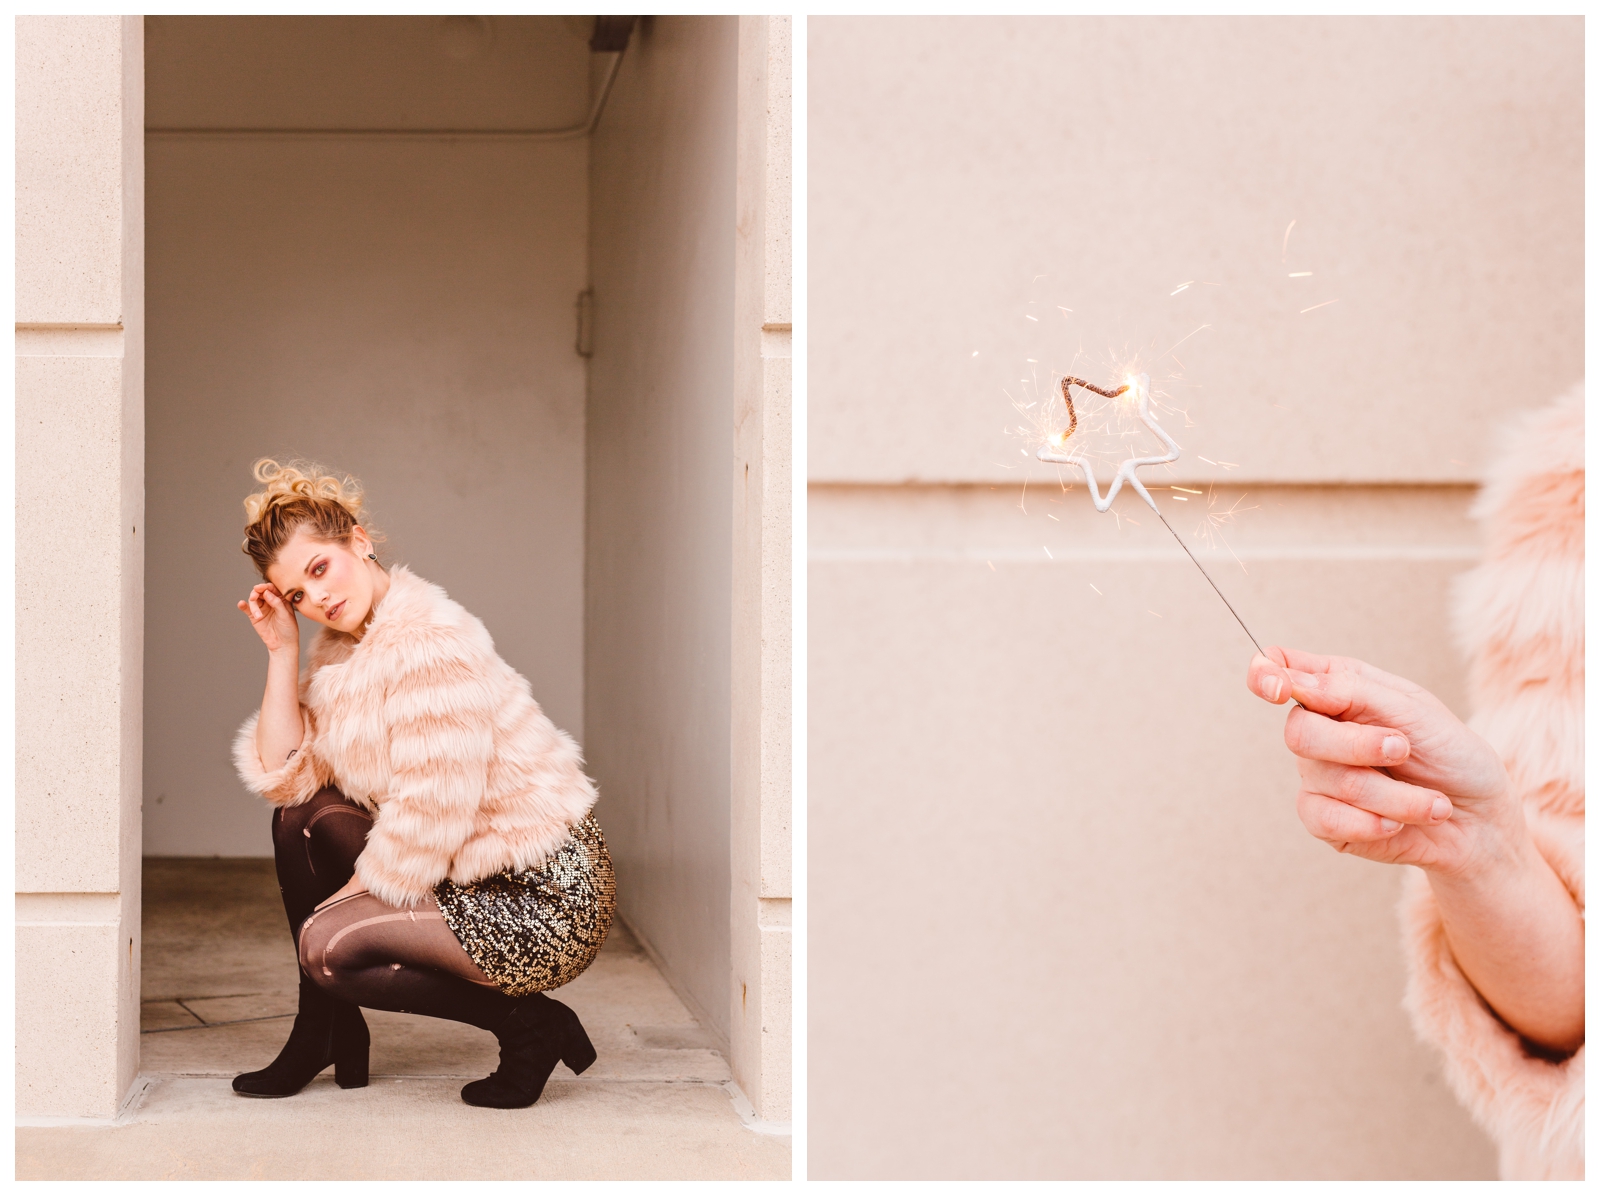 Valentines or Galentines Day Photo Shoot Inspiration - Brooke Michelle Photography